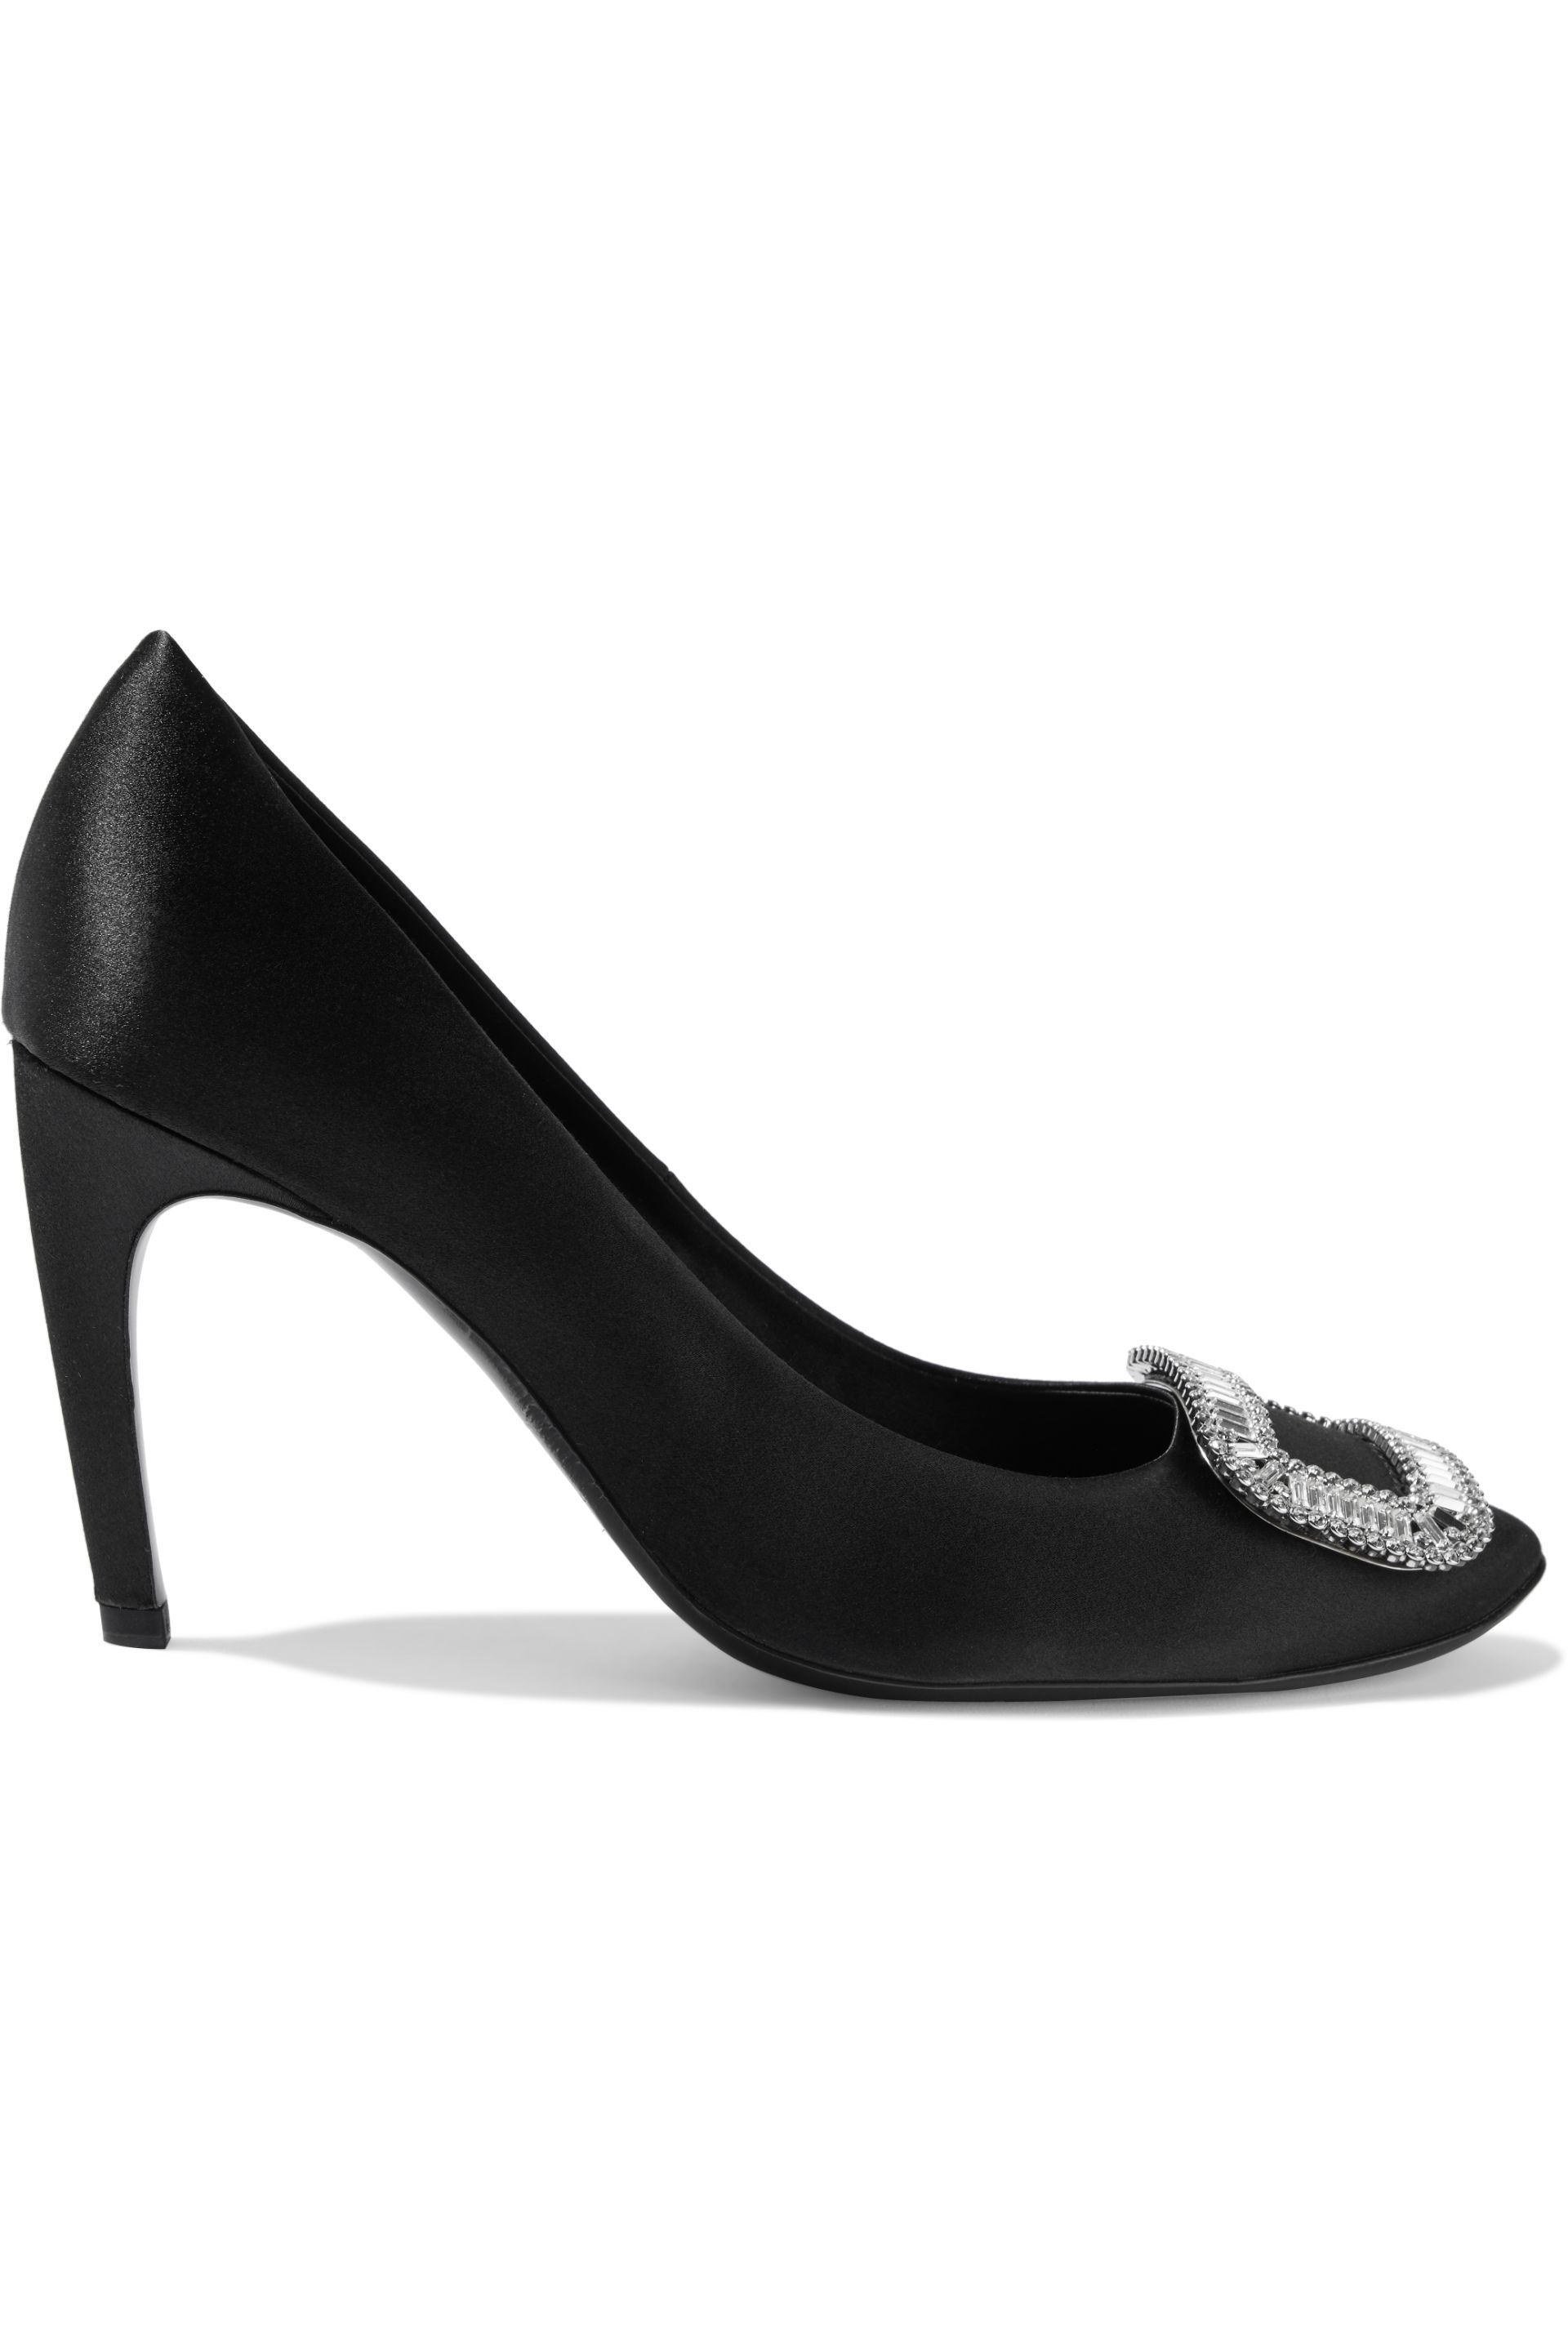 Roger Vivier | Sale up to 70% off | US | THE OUTNET